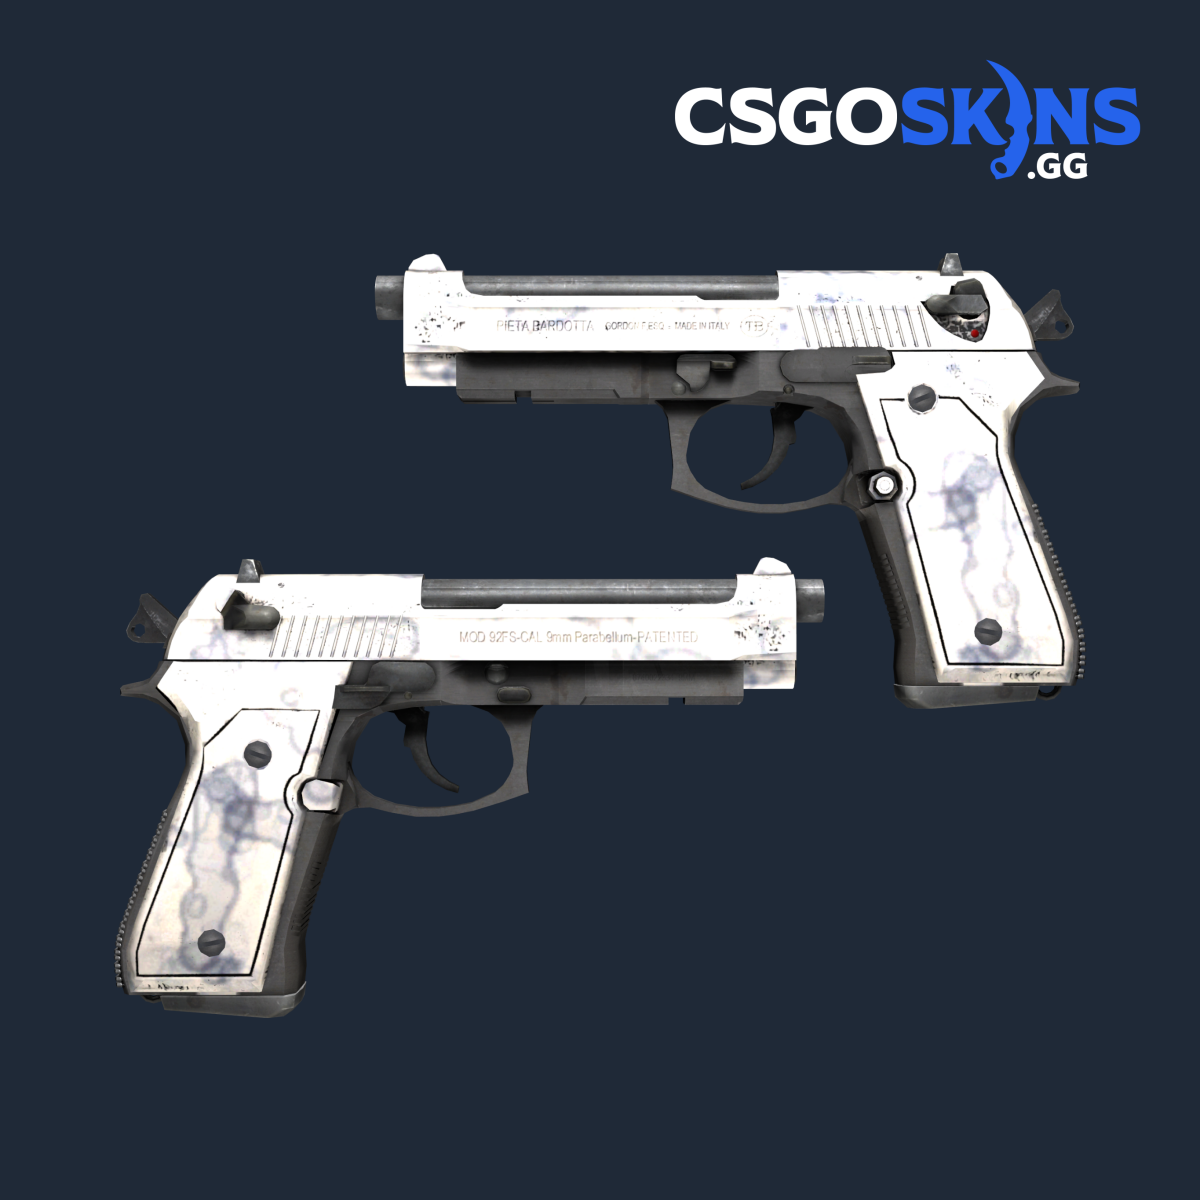 Dual Berettas Stained cs go skin instaling